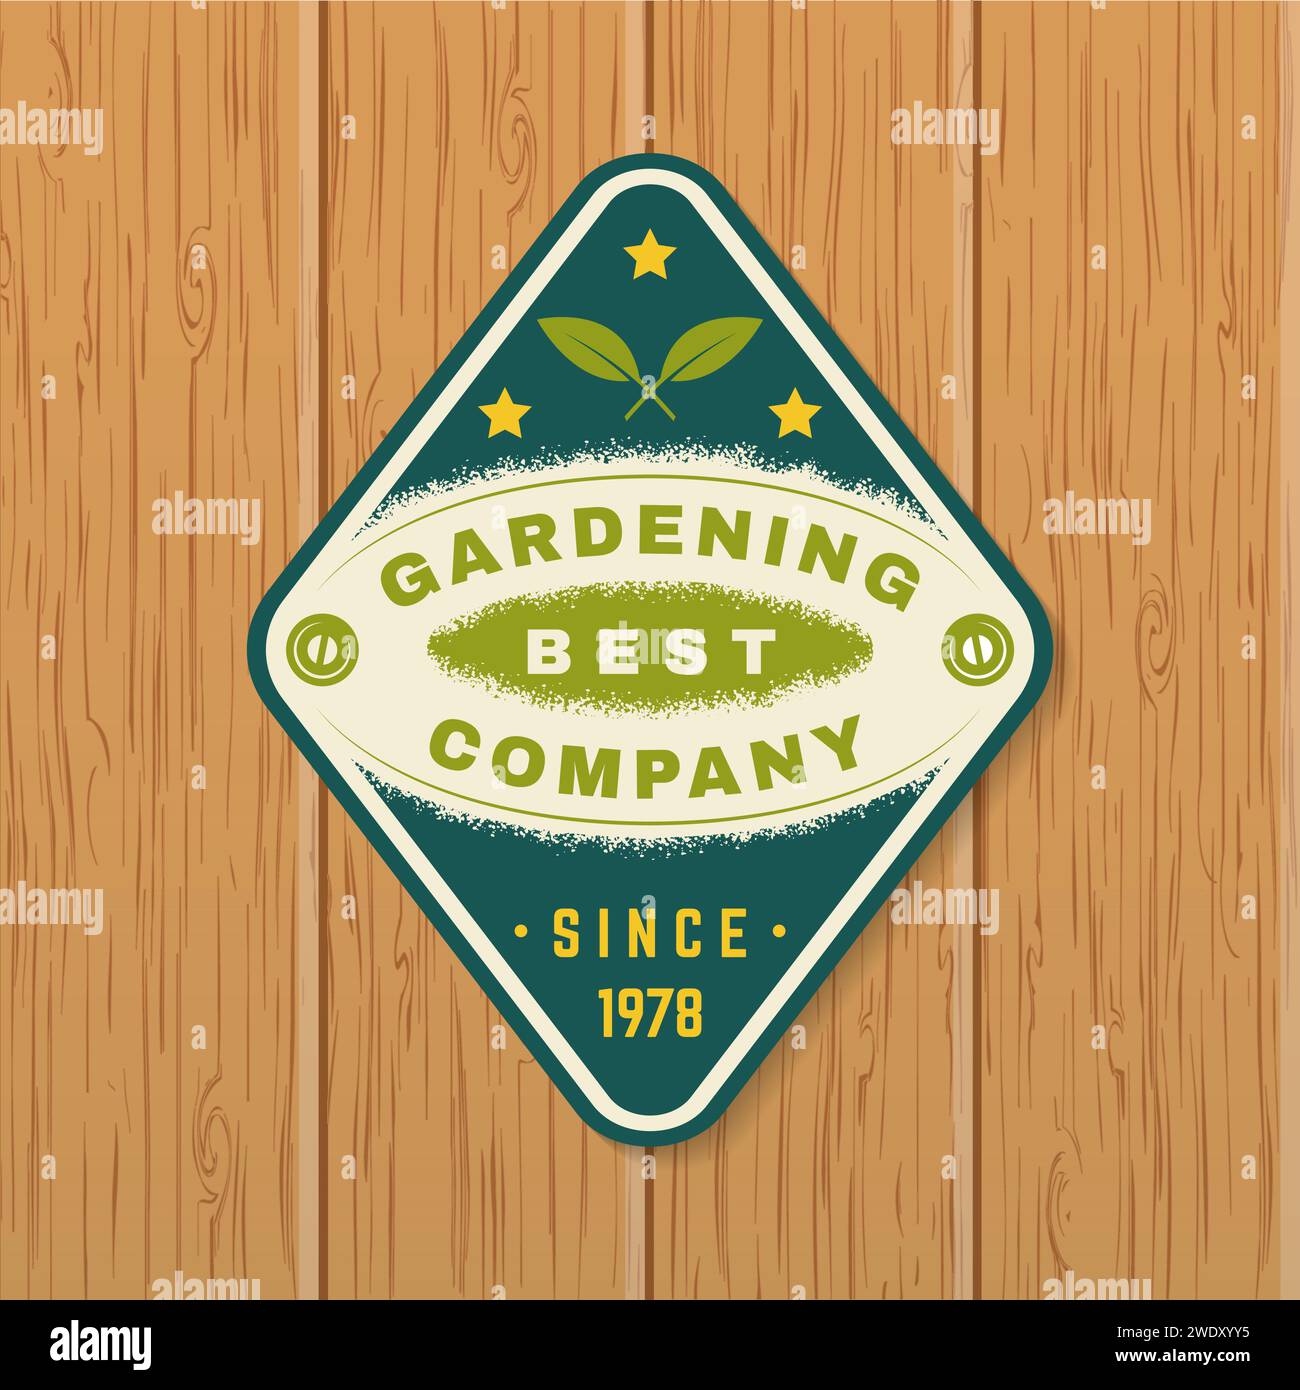 Gardening company emblem, label, badge, logo. Vector illustration. For sign, patch, shirt design with garden seedlings silhouette. Stock Vector